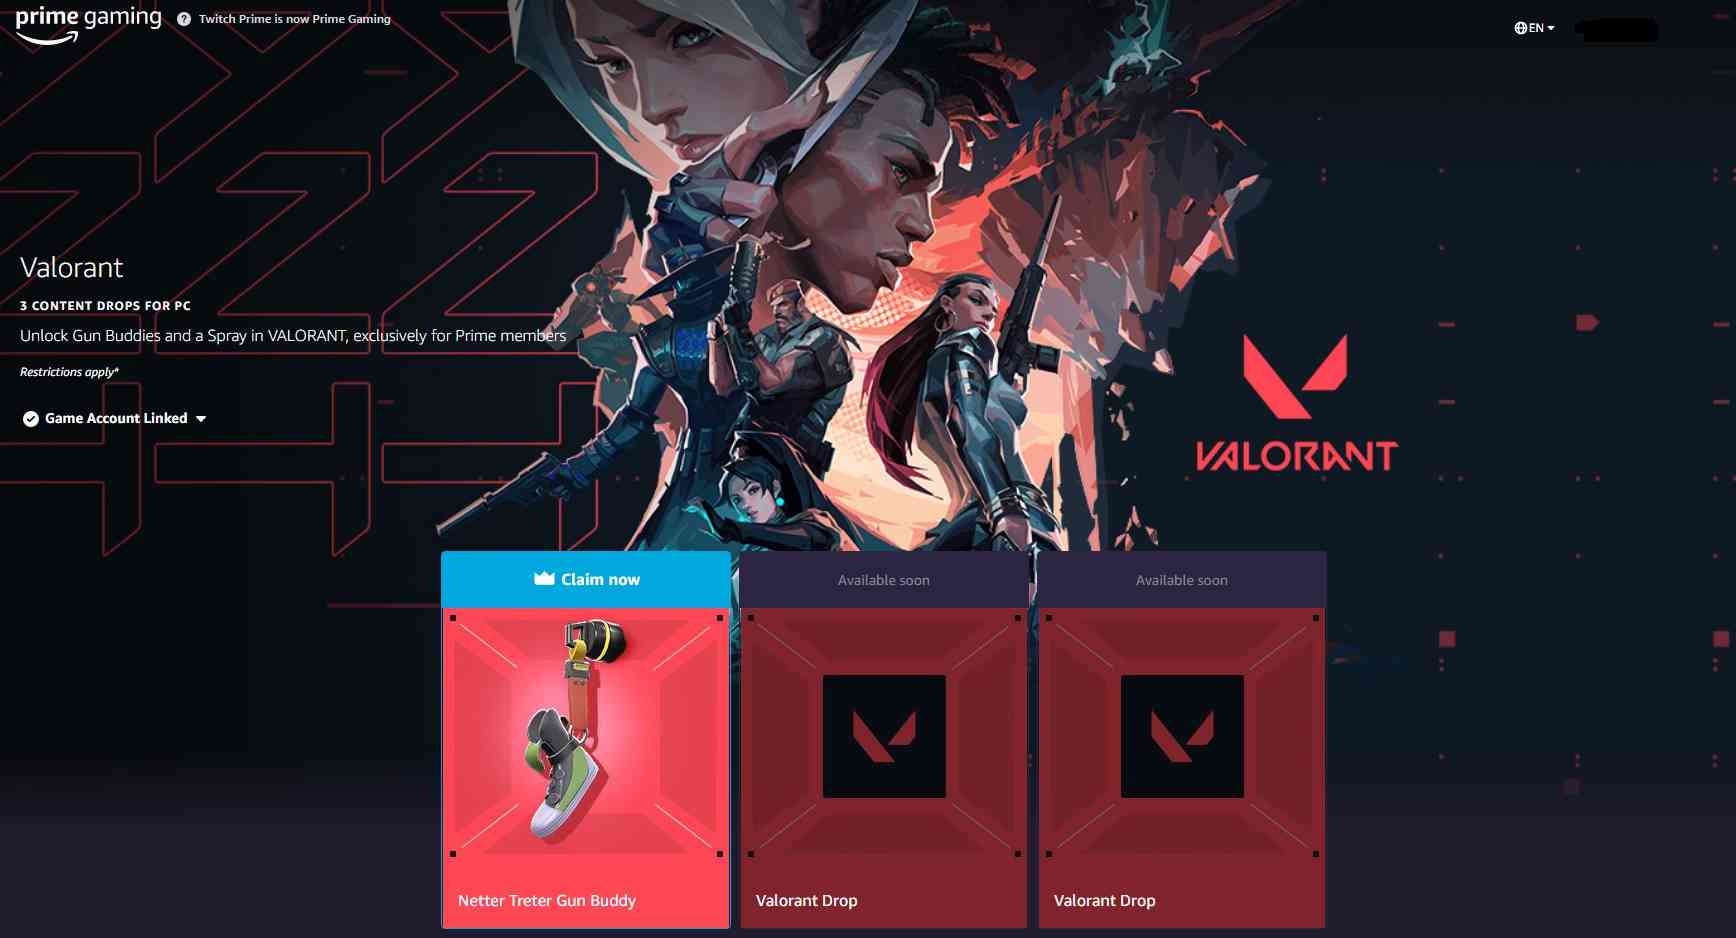 How to redeem free Valorant drops from Prime Gaming in 2023?